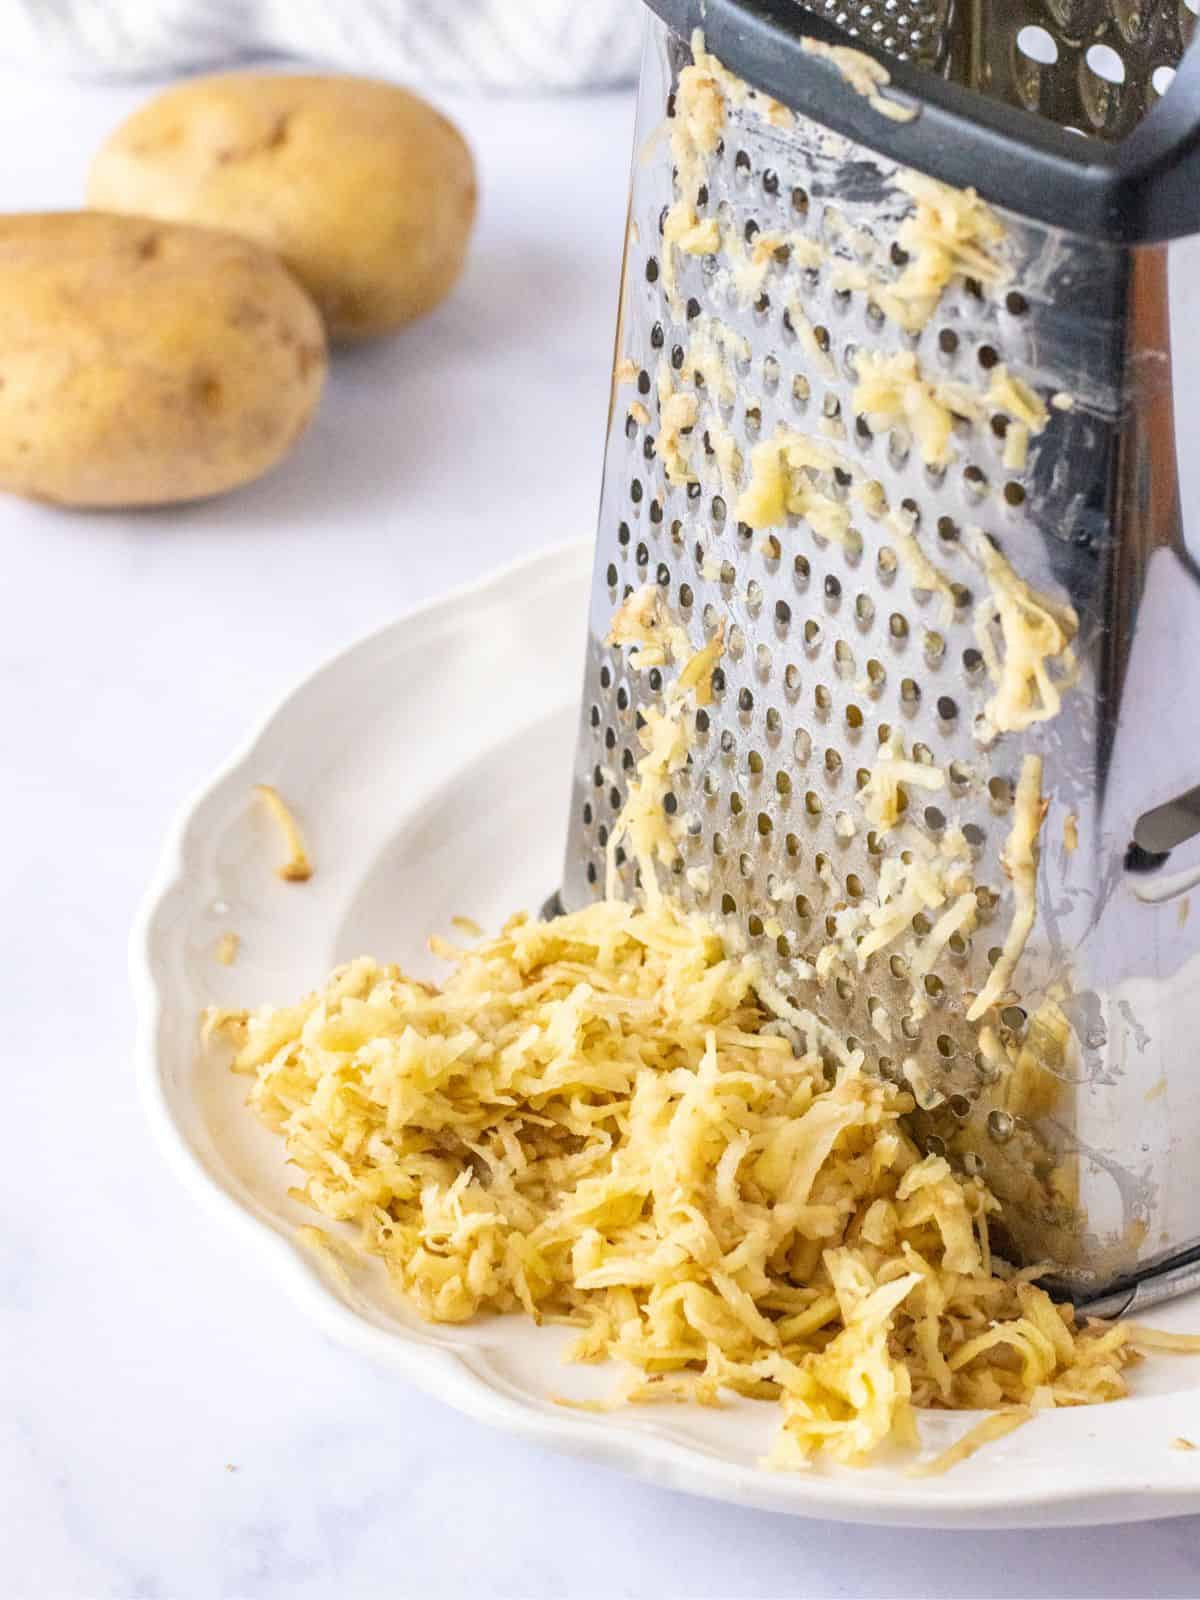 Grated potatoes on a plate next to a box grater.